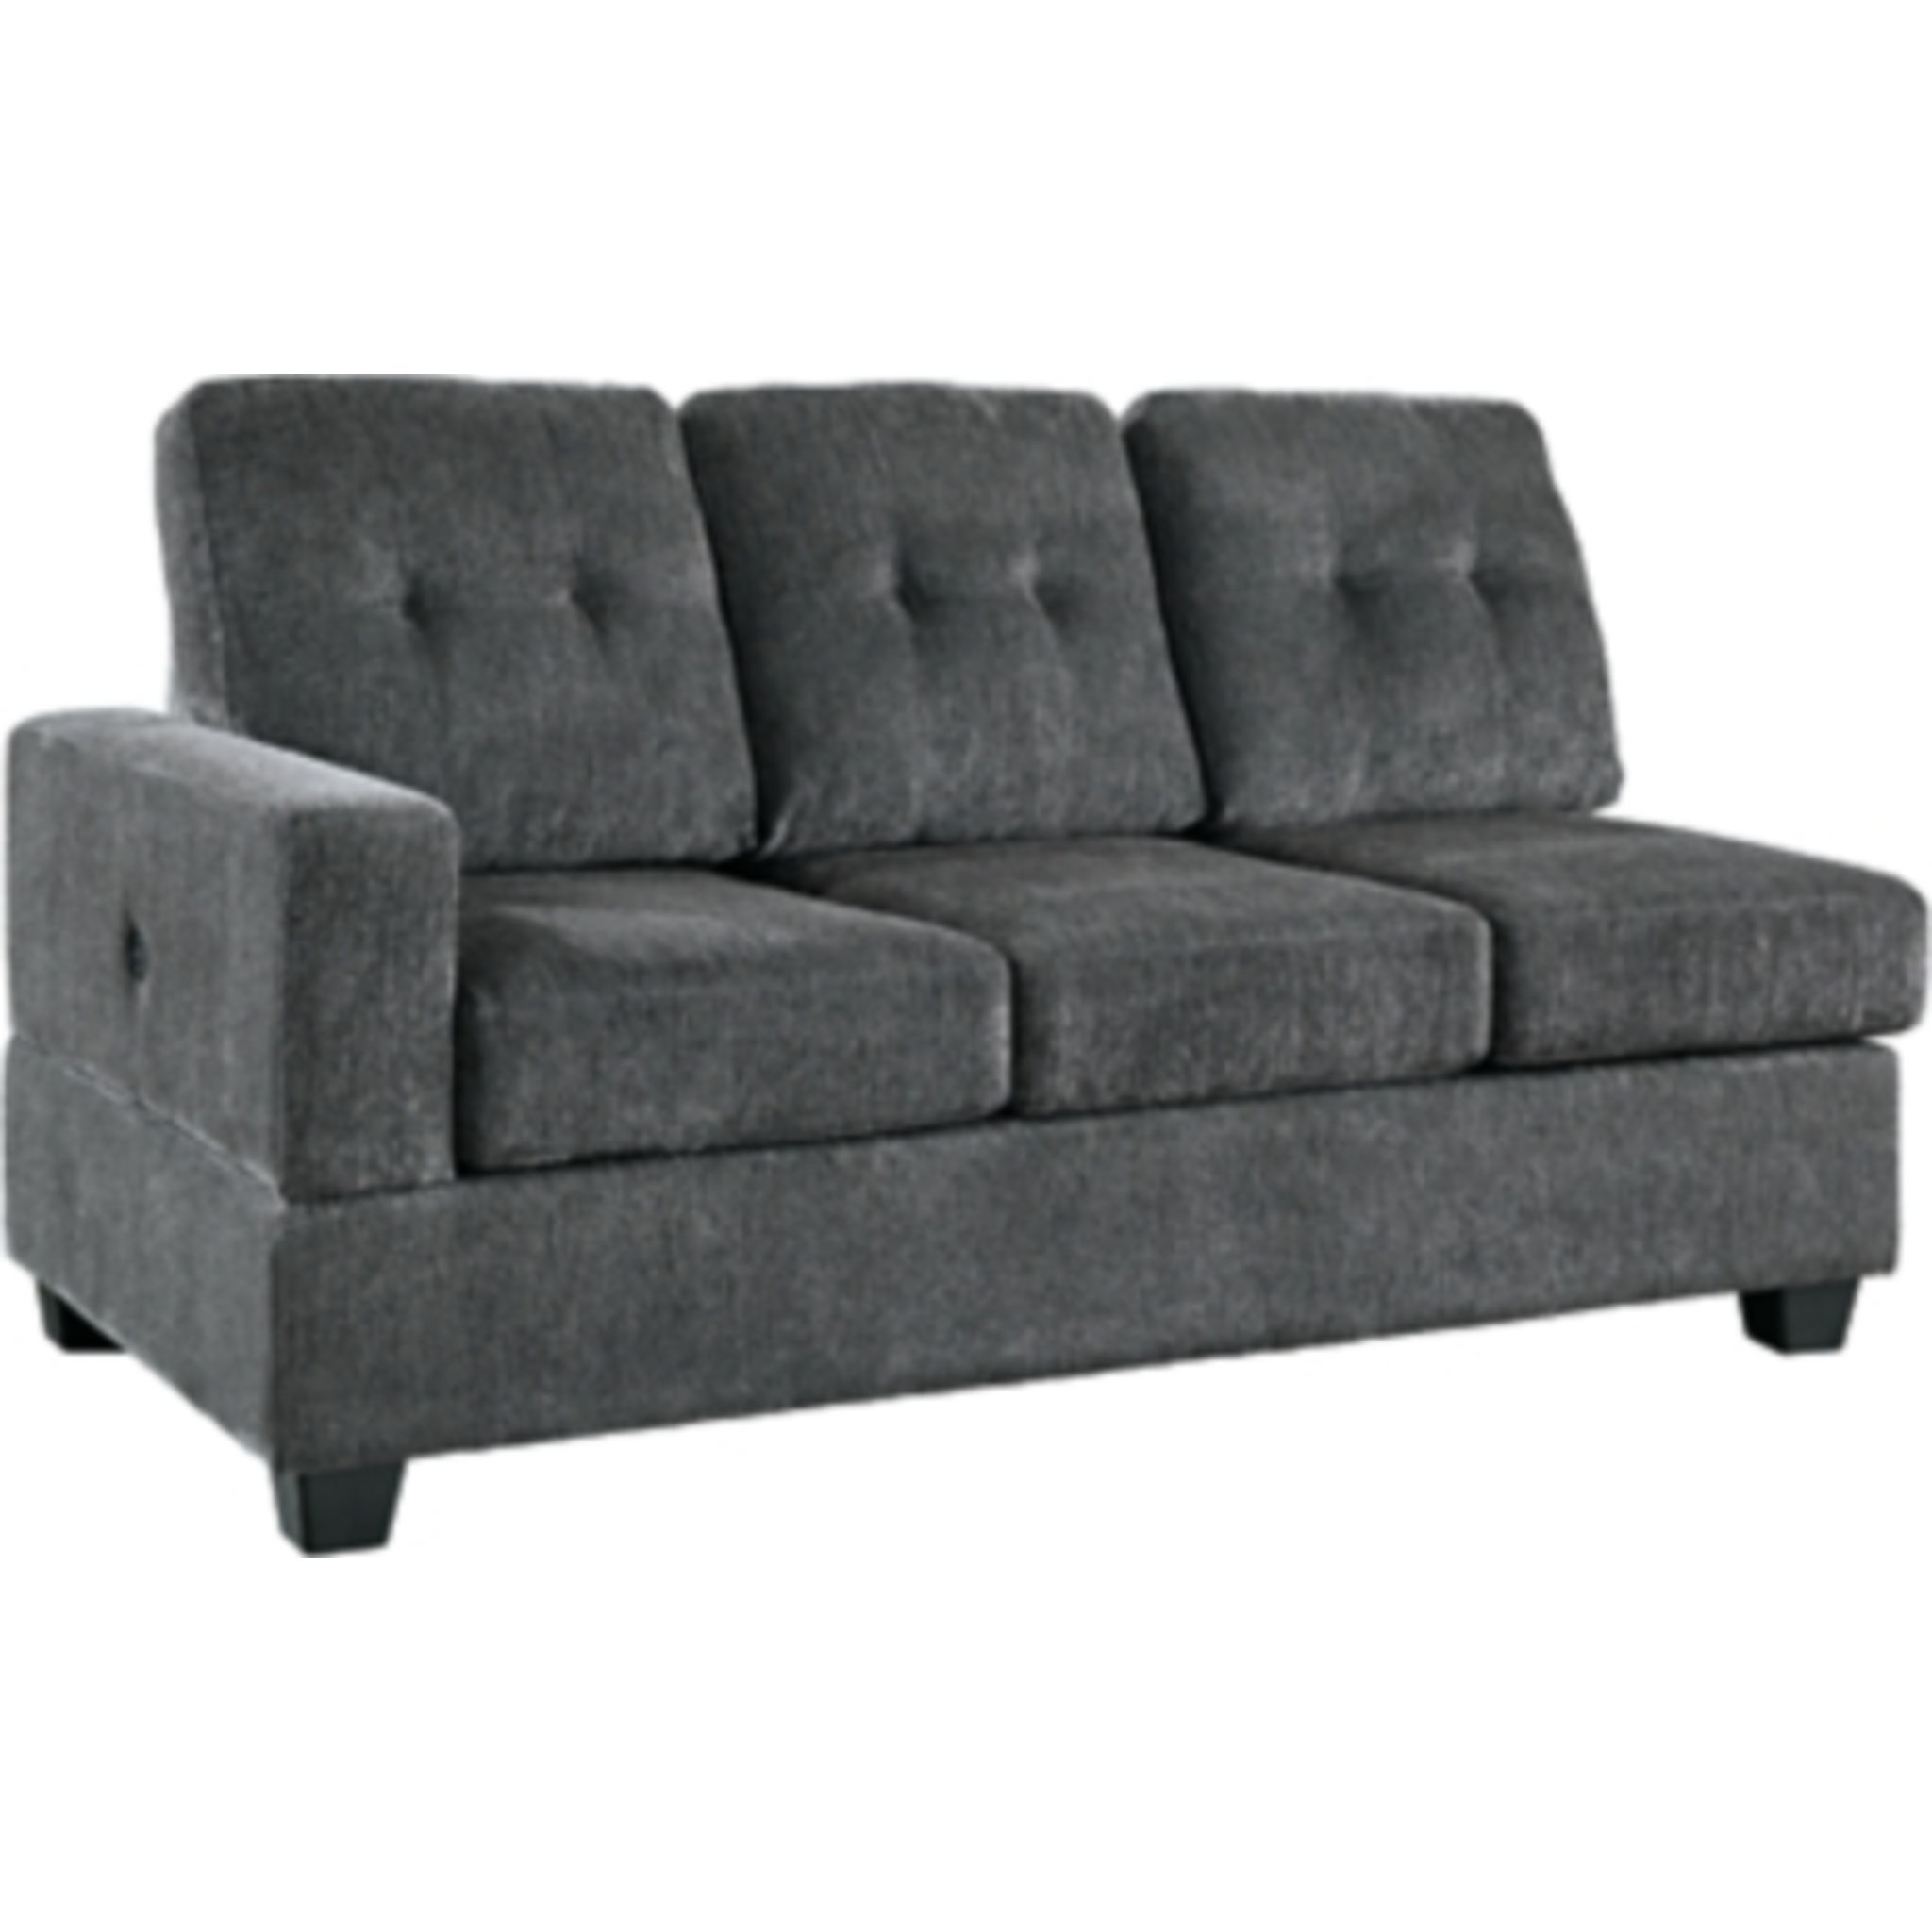 Signature Design by Ashley Living Room Ambrielle 2-Piece Sectional 11902S2  - Gardner Outlet